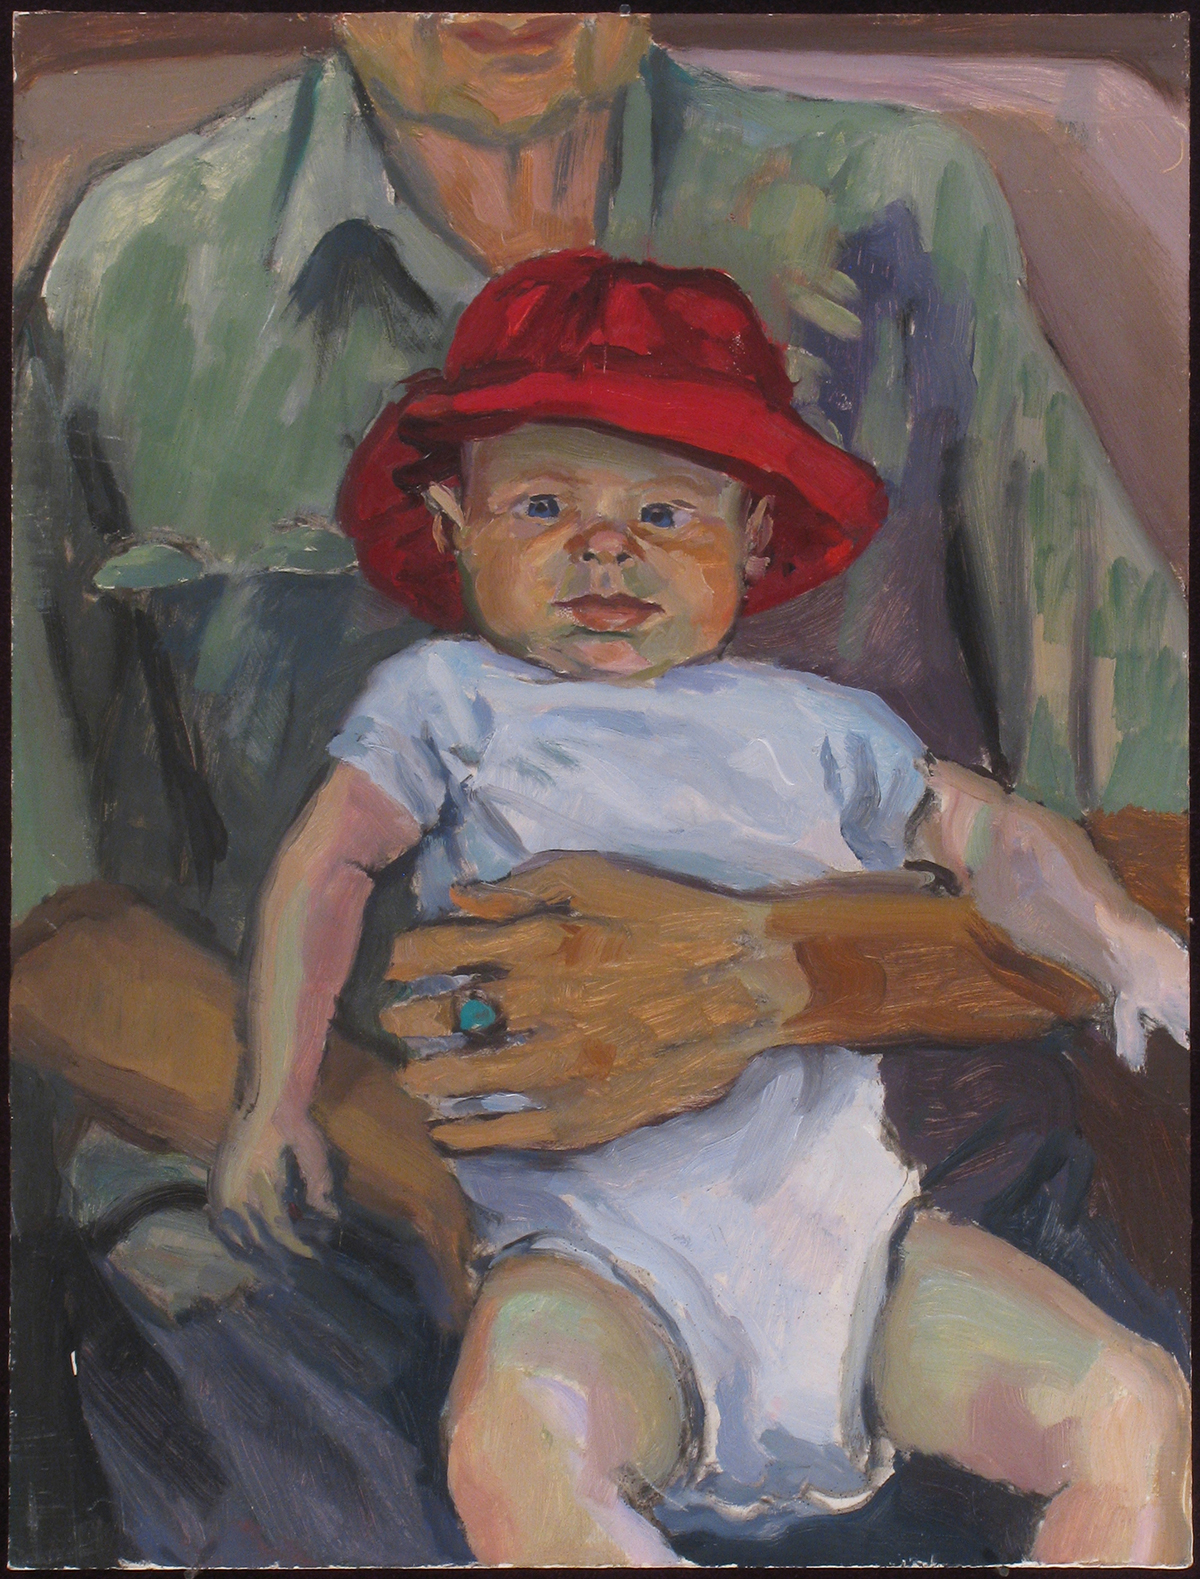  ADRIAN WITH RED HAT oil on panel 12 x 9” 2006 